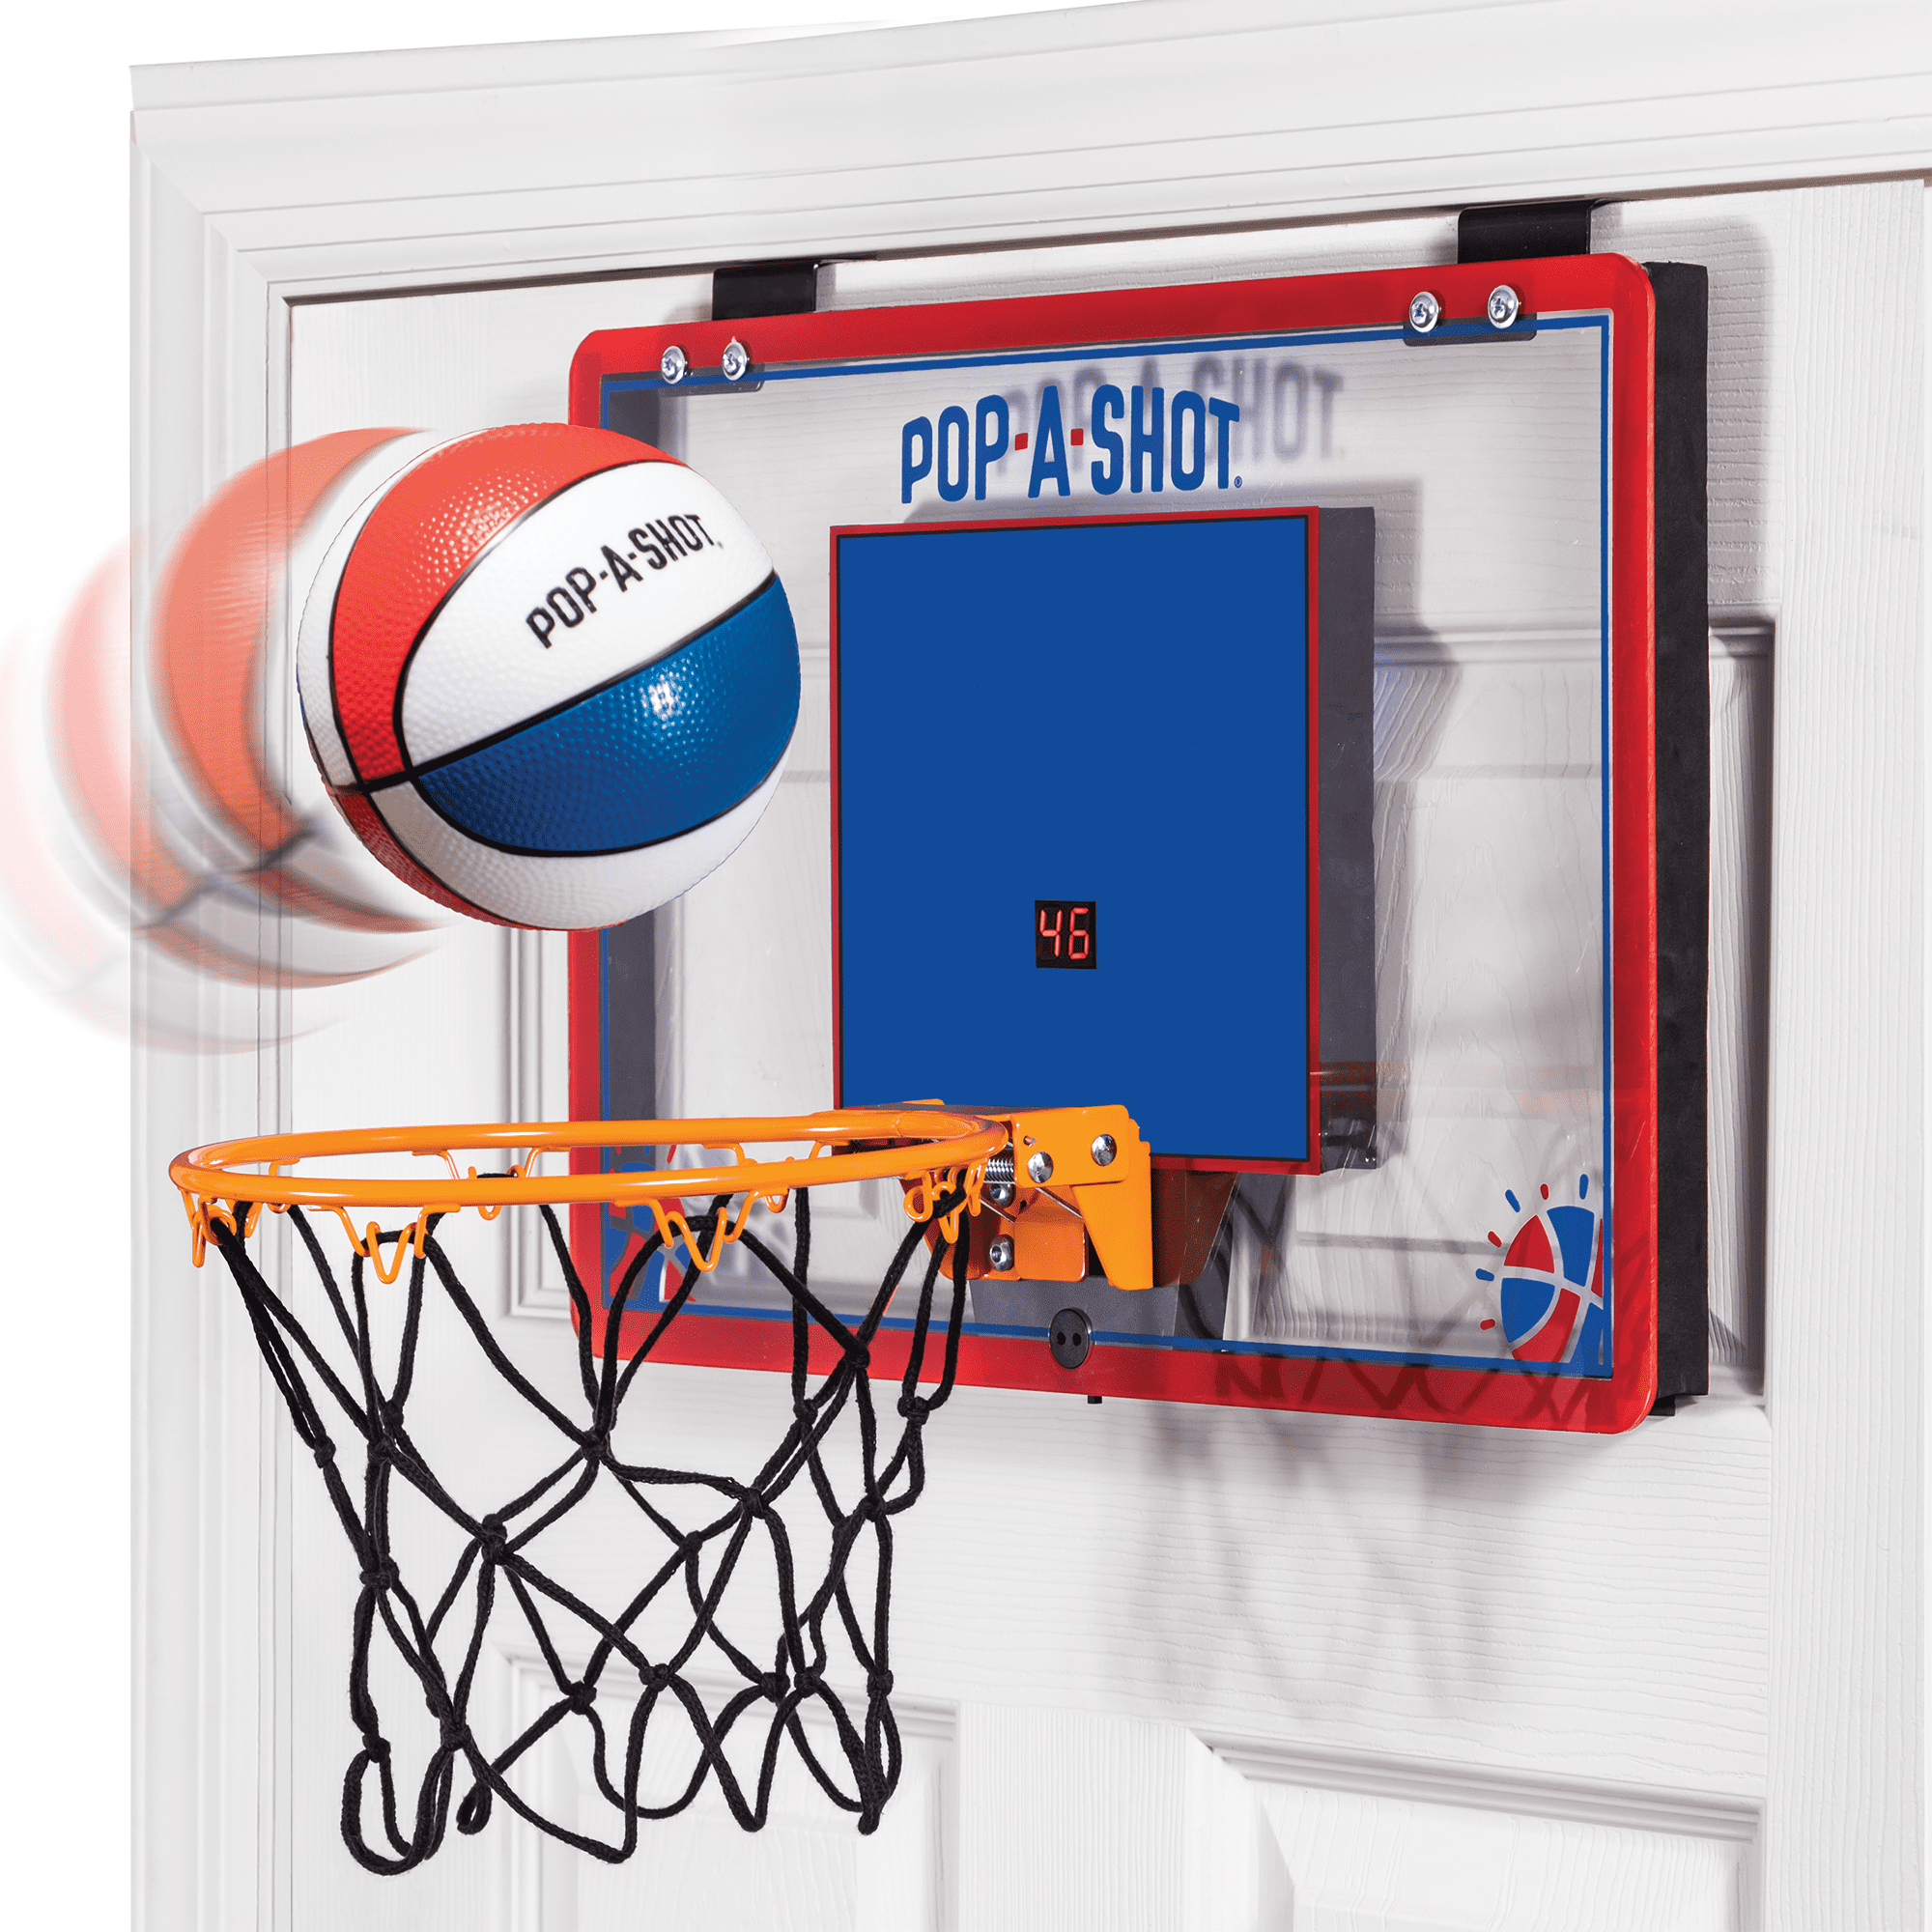 Game Toy Gifts for Boys Girls Teens at Home Office Pro 17X13 Basketball Set Over Door Wall Room with 3 Balls & Electronic Scoreboard Indoor Mini Basketball Hoop for Kids and Adults